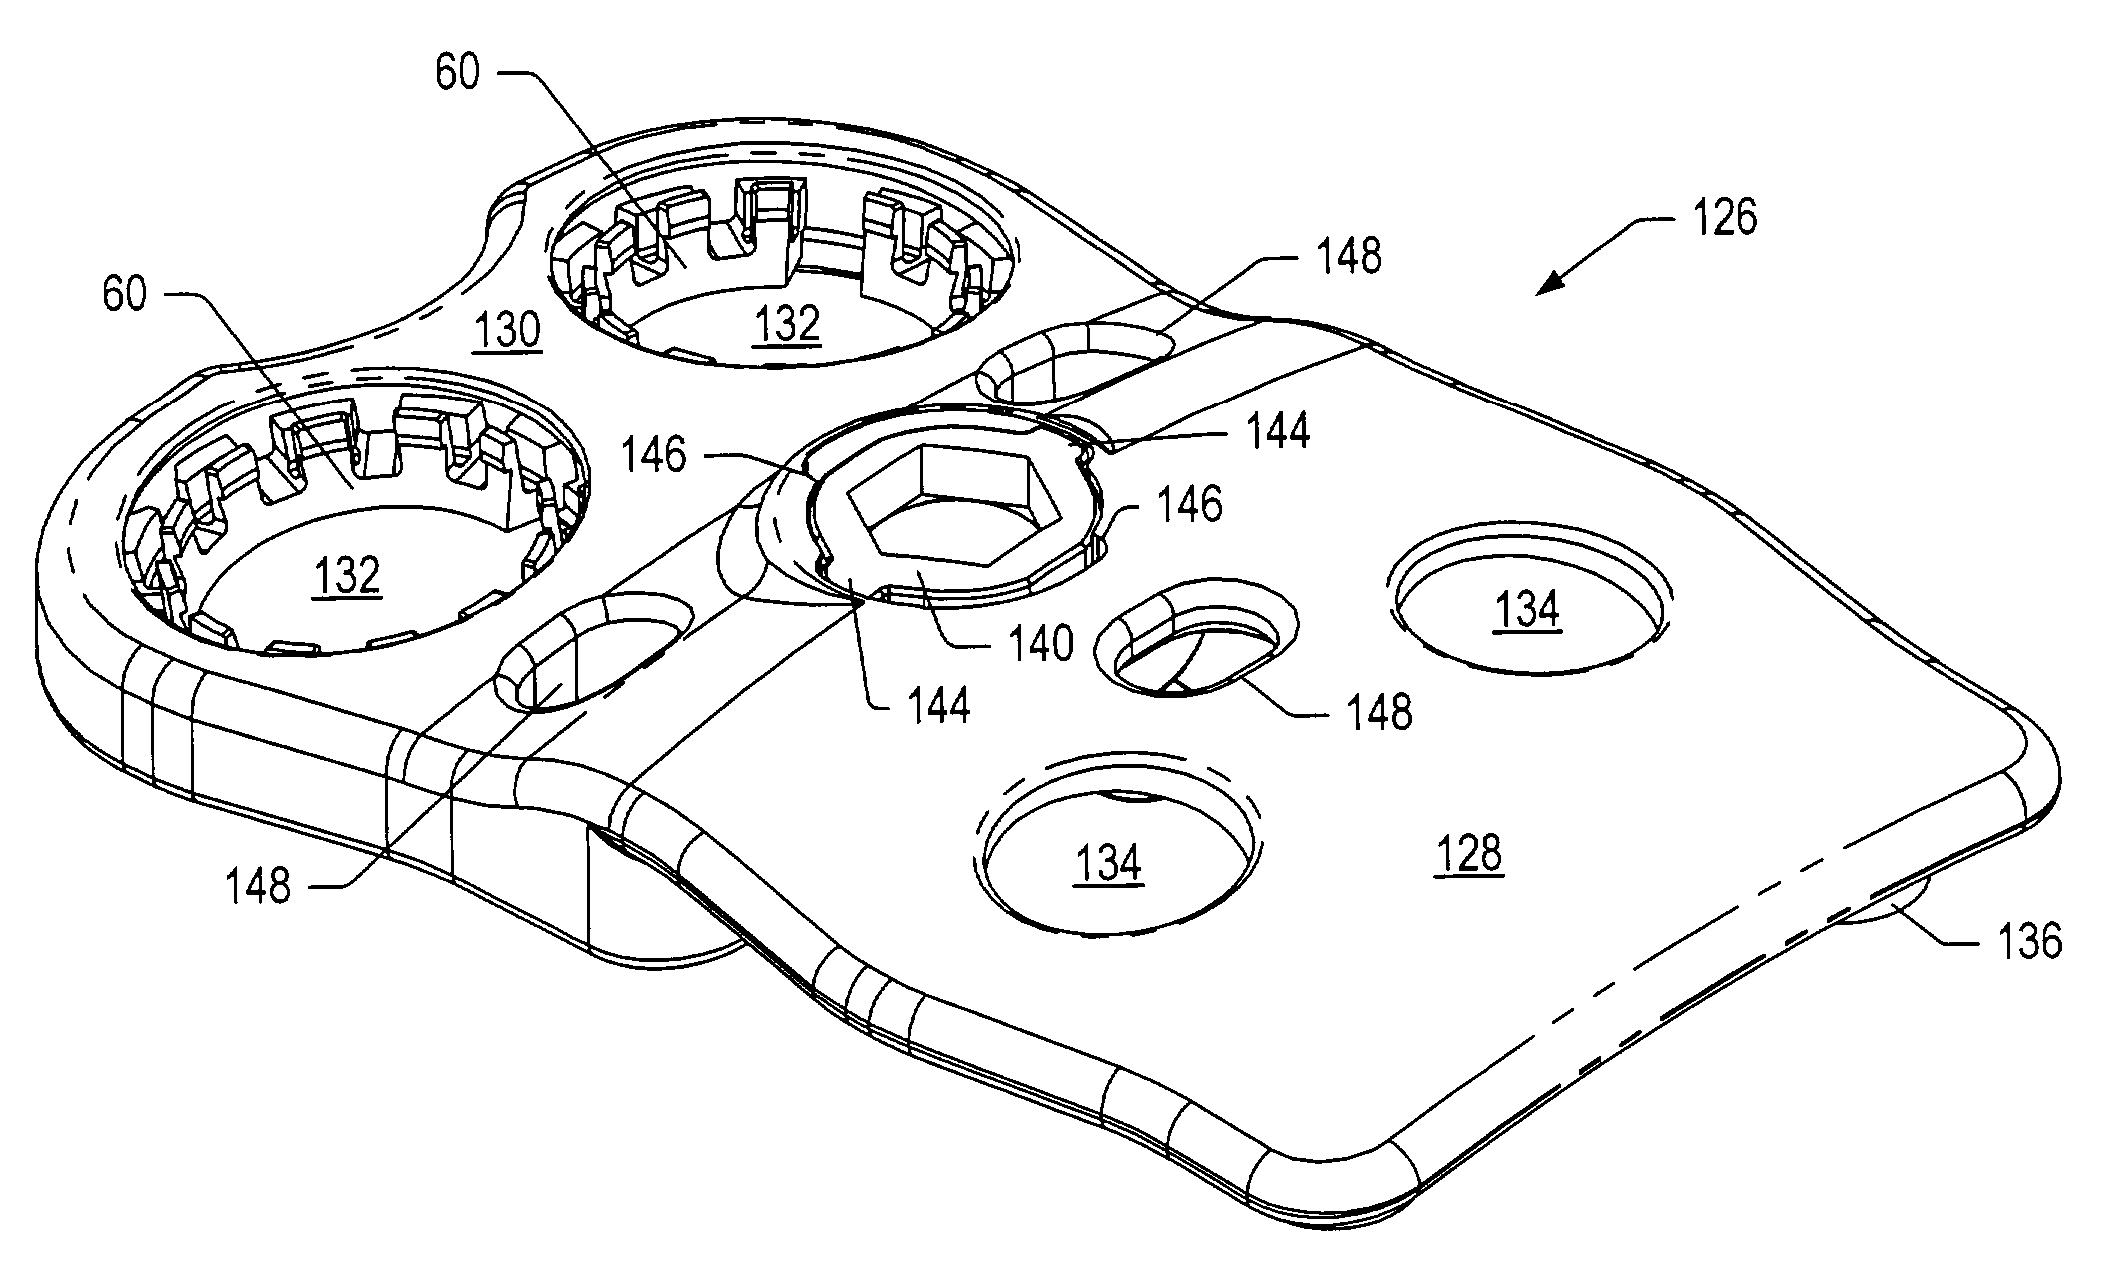 Spinal plate extender system and method